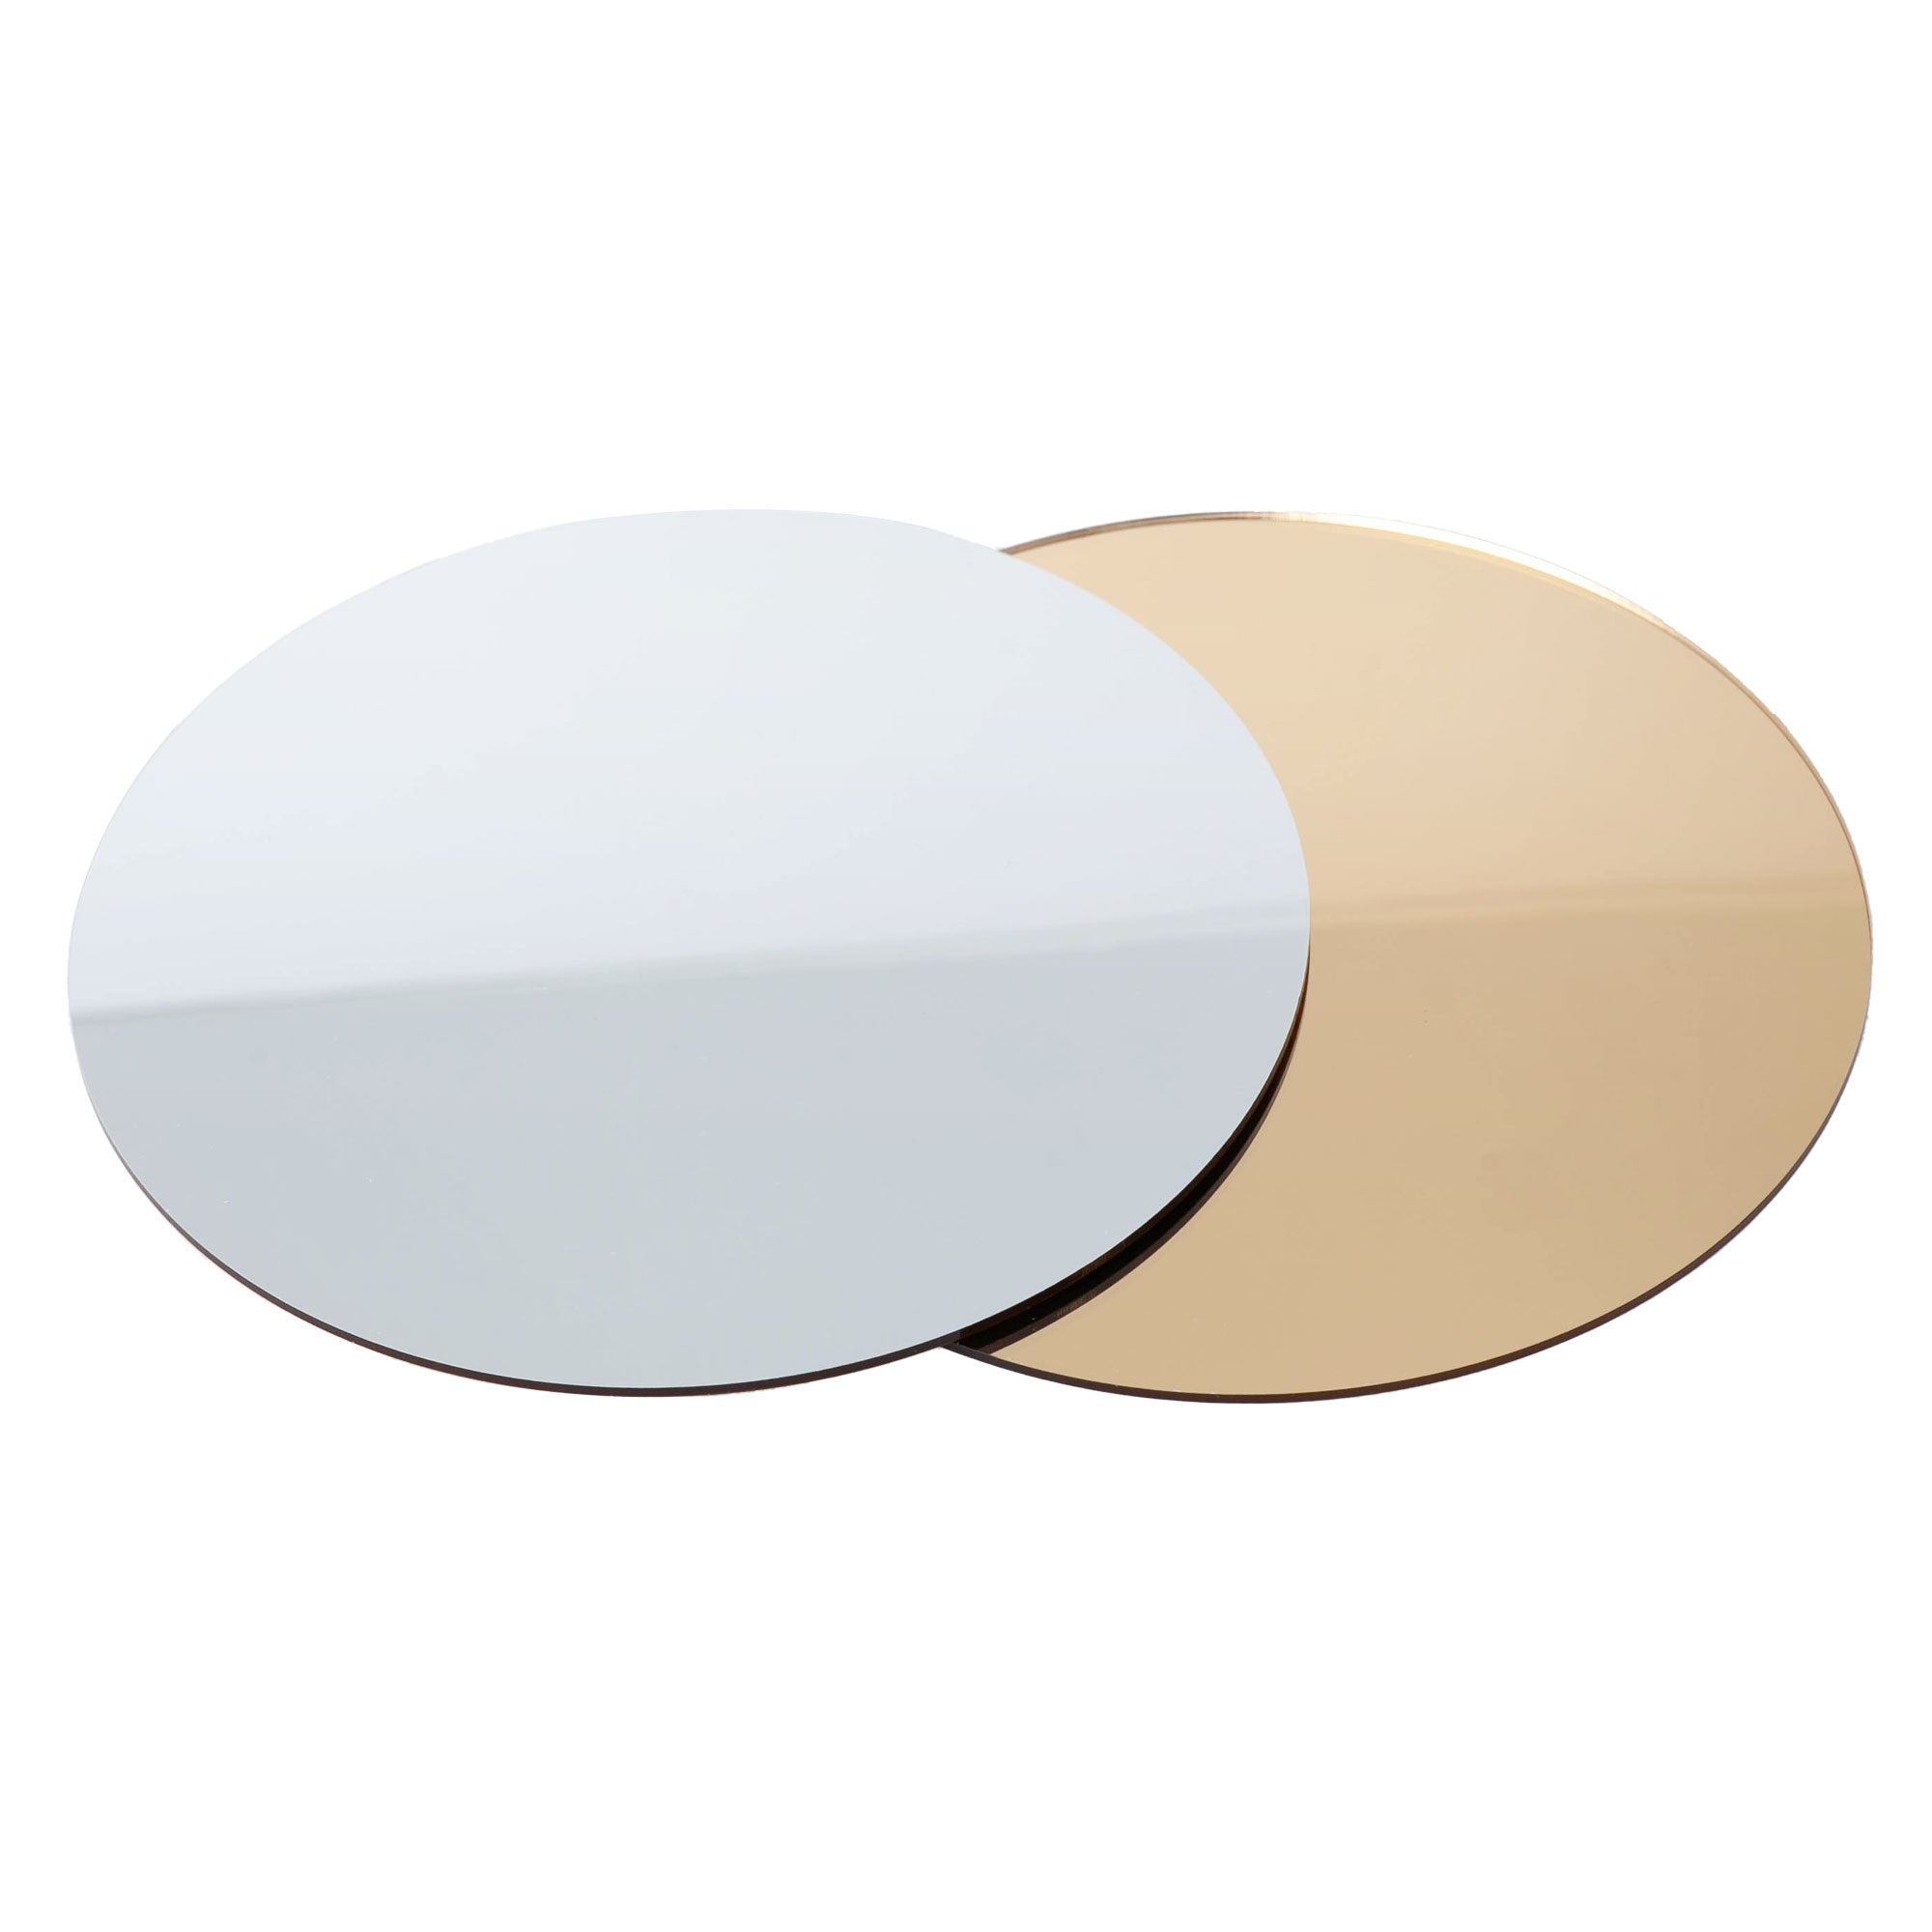 Lacupella 8 Inch Reusable Cake Board Base White Glossy Acrylic Round Disk  Set of 2-1/8 or 0.12 inch Thickness for Cake Serving and Enhanced